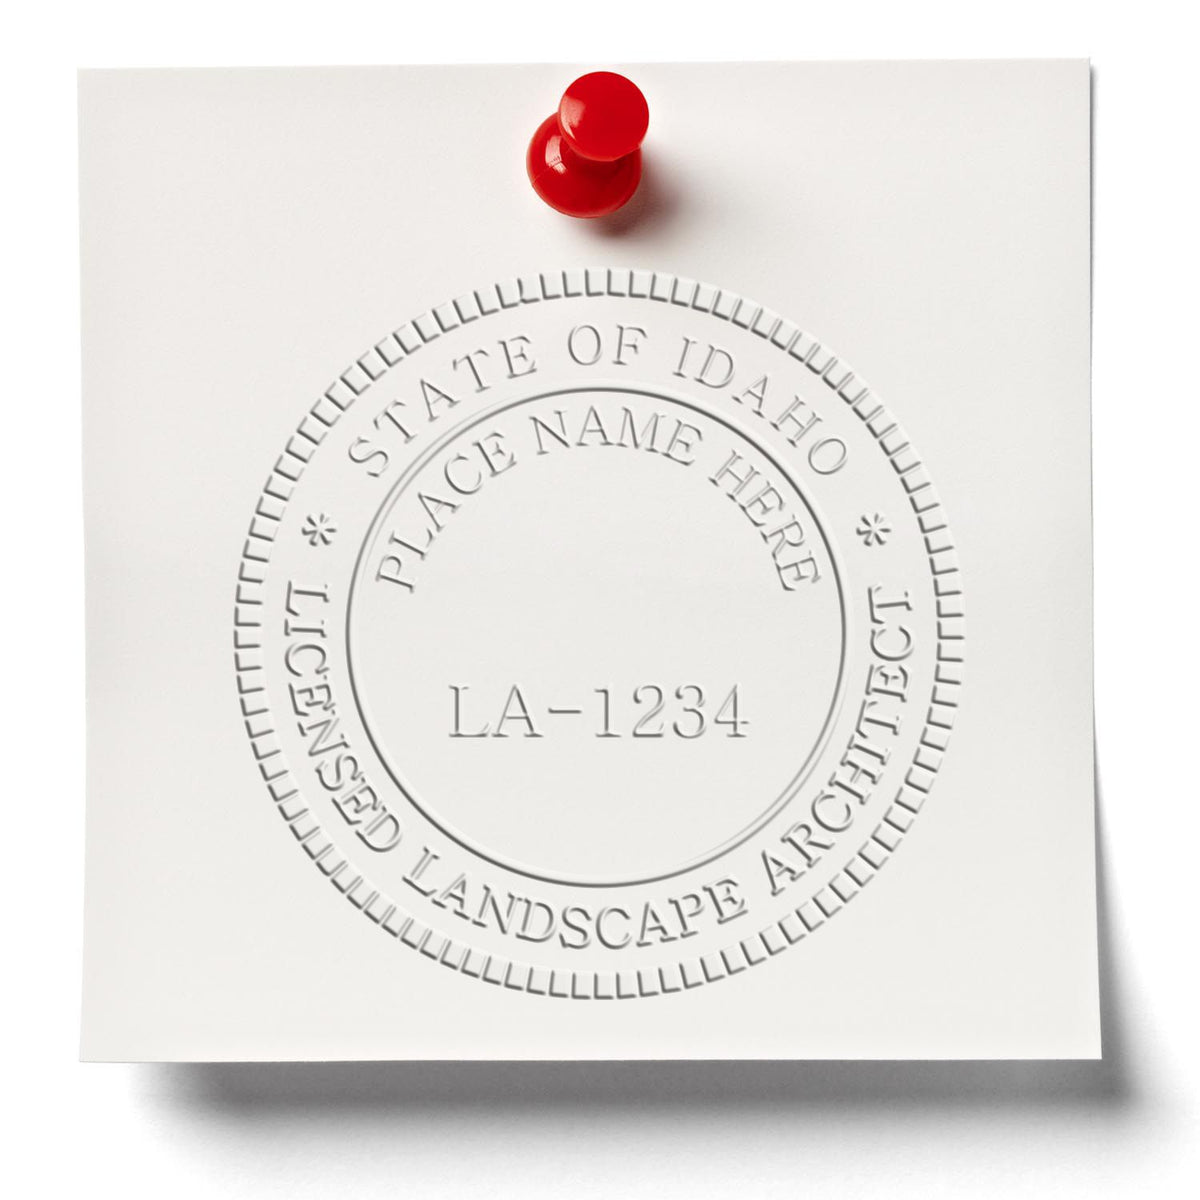 The Gift Idaho Landscape Architect Seal stamp impression comes to life with a crisp, detailed image stamped on paper - showcasing true professional quality.